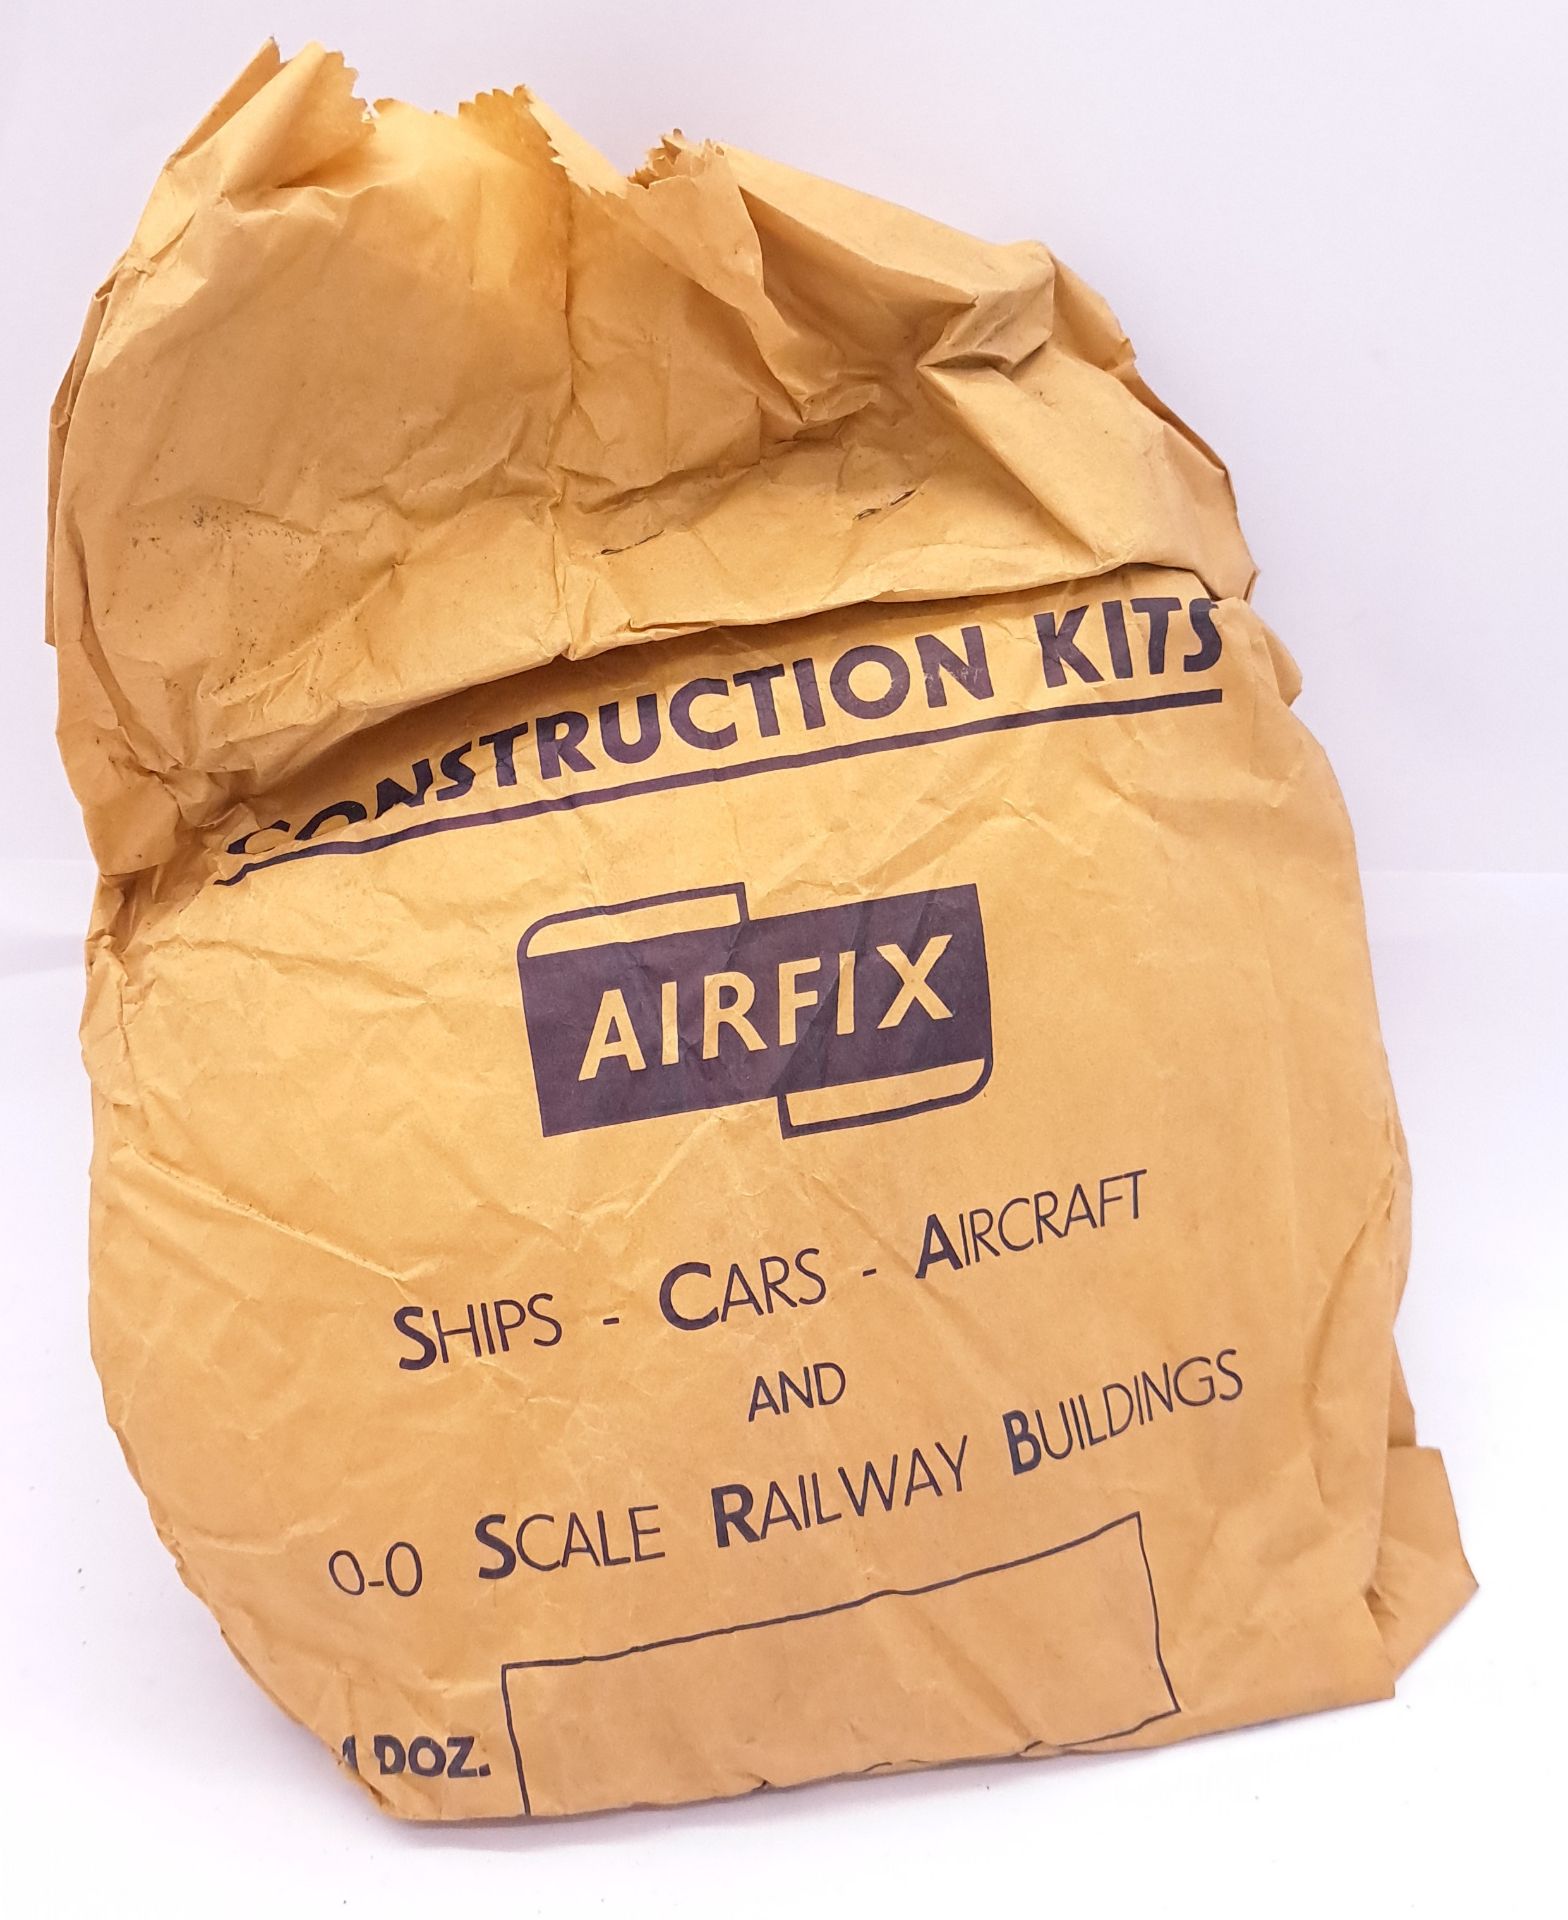 Airfix c1960’s ORIGINAL TRADE BAG complete with Bagged (possibly Type3) “Fokker DR1” Kits - Image 3 of 7